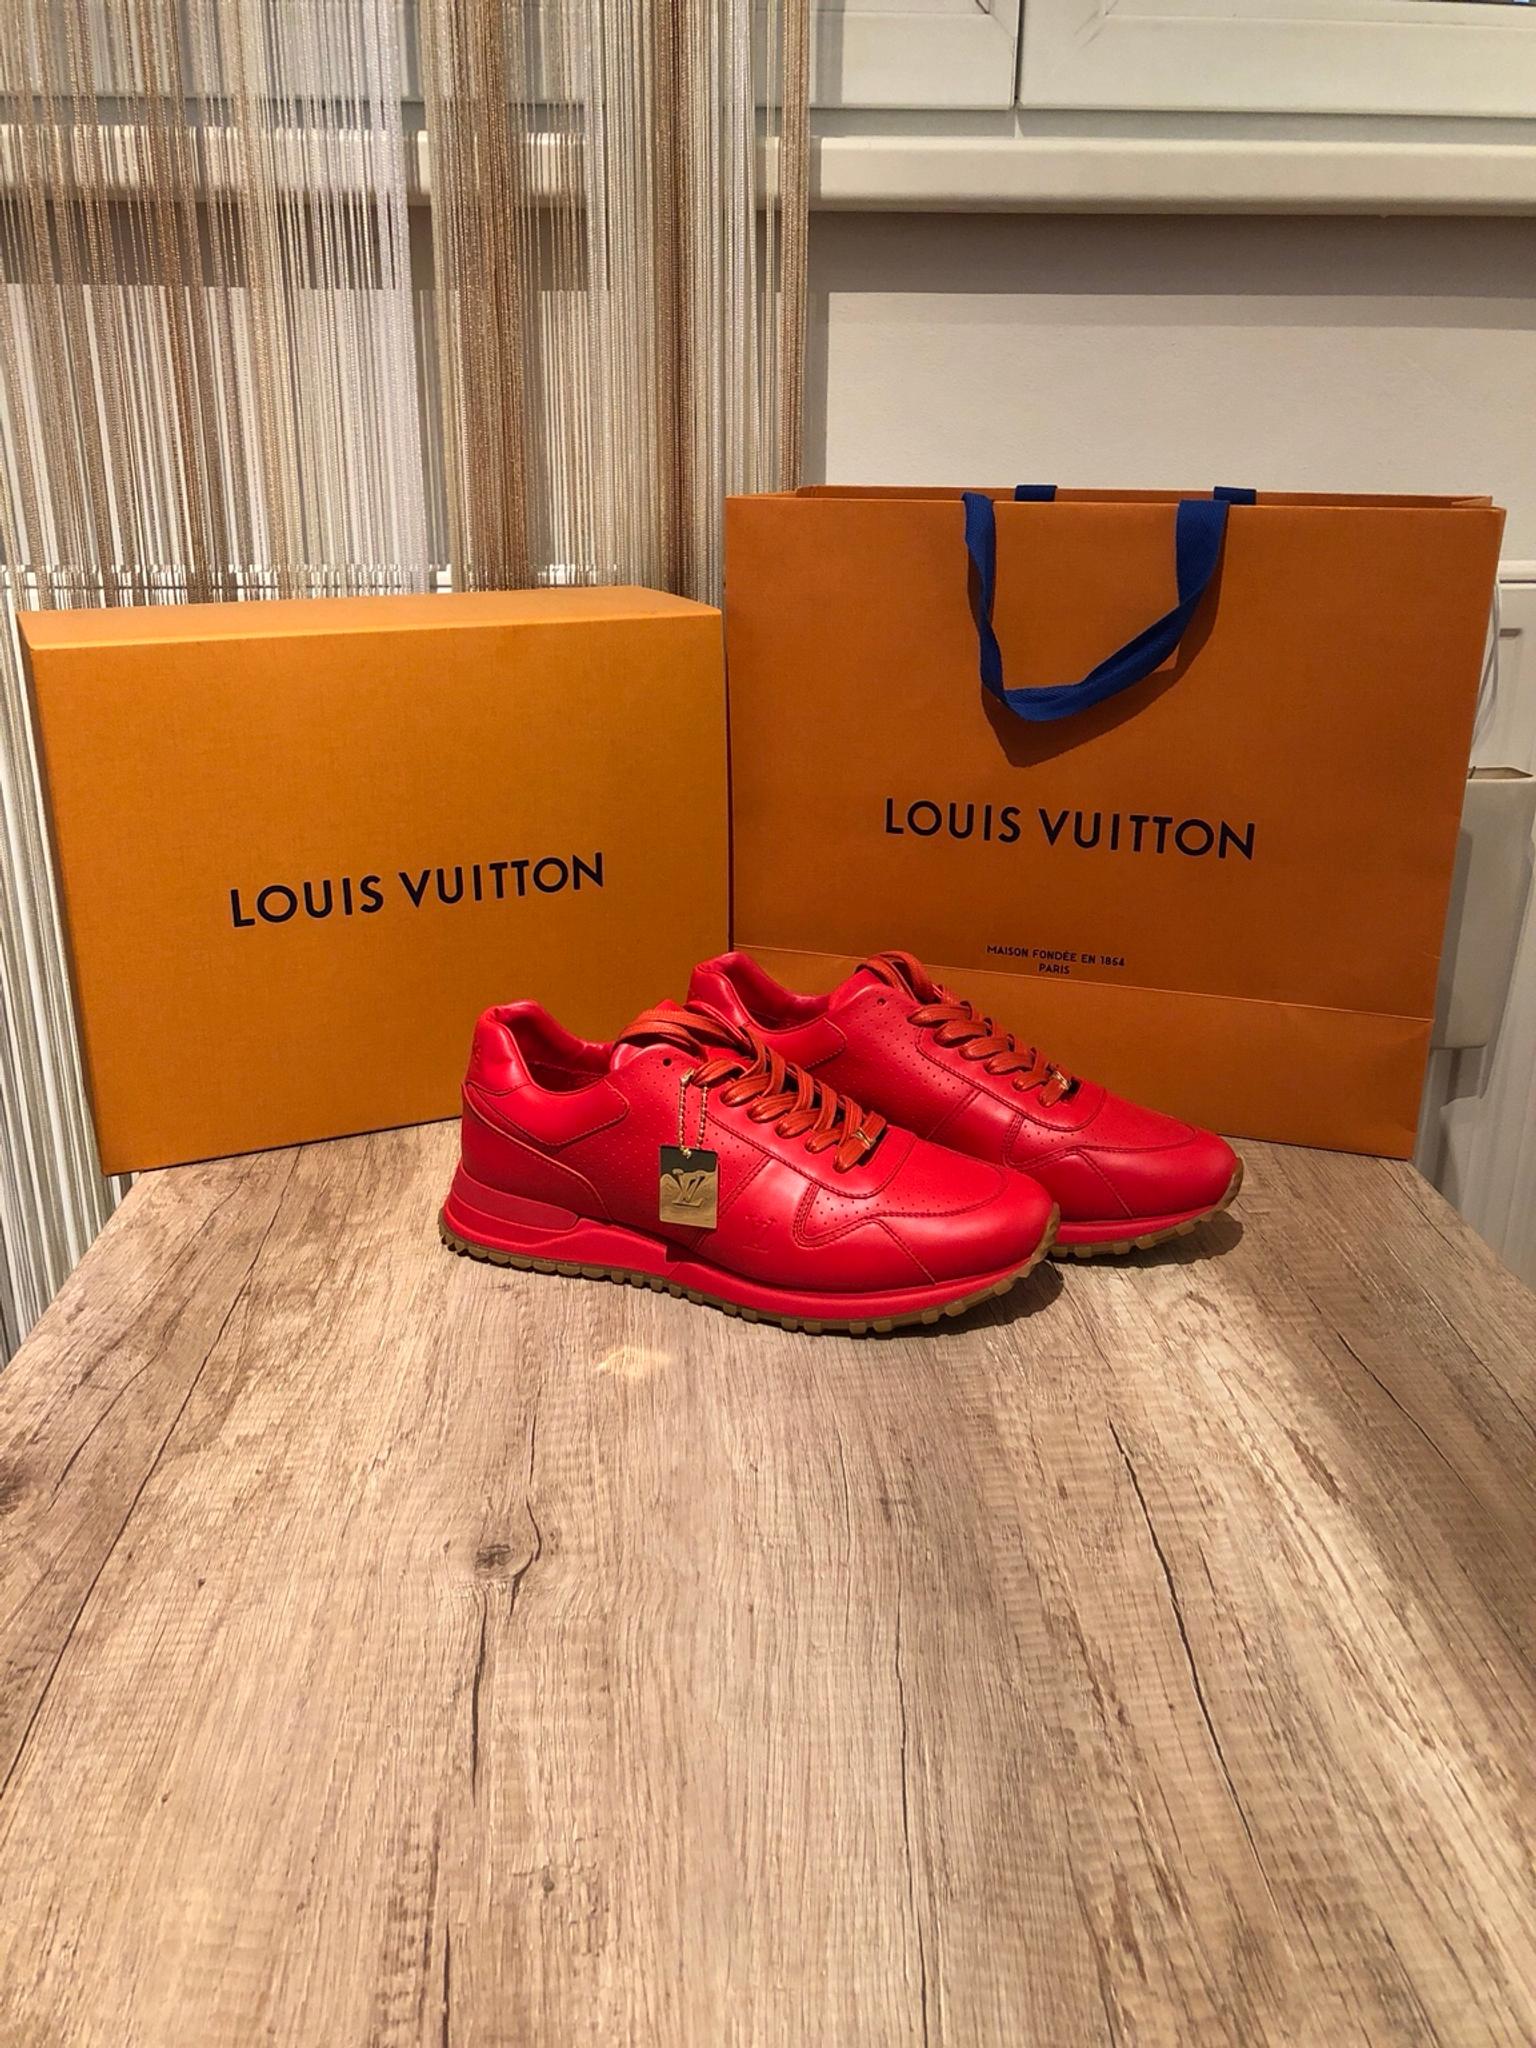 Louis Vuitton X Supreme Schuhe In 4073 Wilhering For 550 00 For Sale Shpock